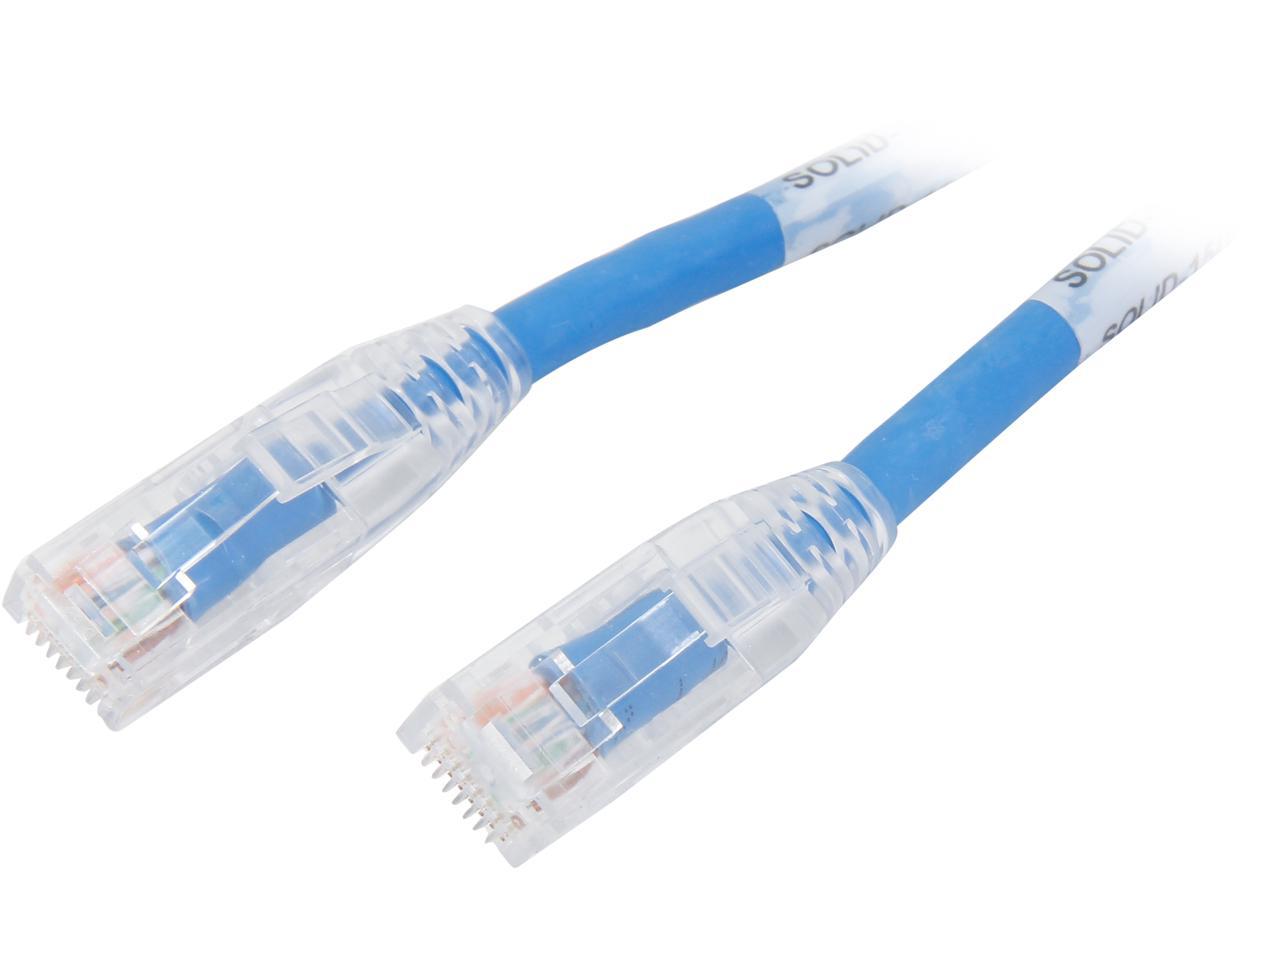 TRIPP LITE N202-150-BL 150 ft. Cat 6 Blue Gigabit Solid Conductor Snagless Patch Cable